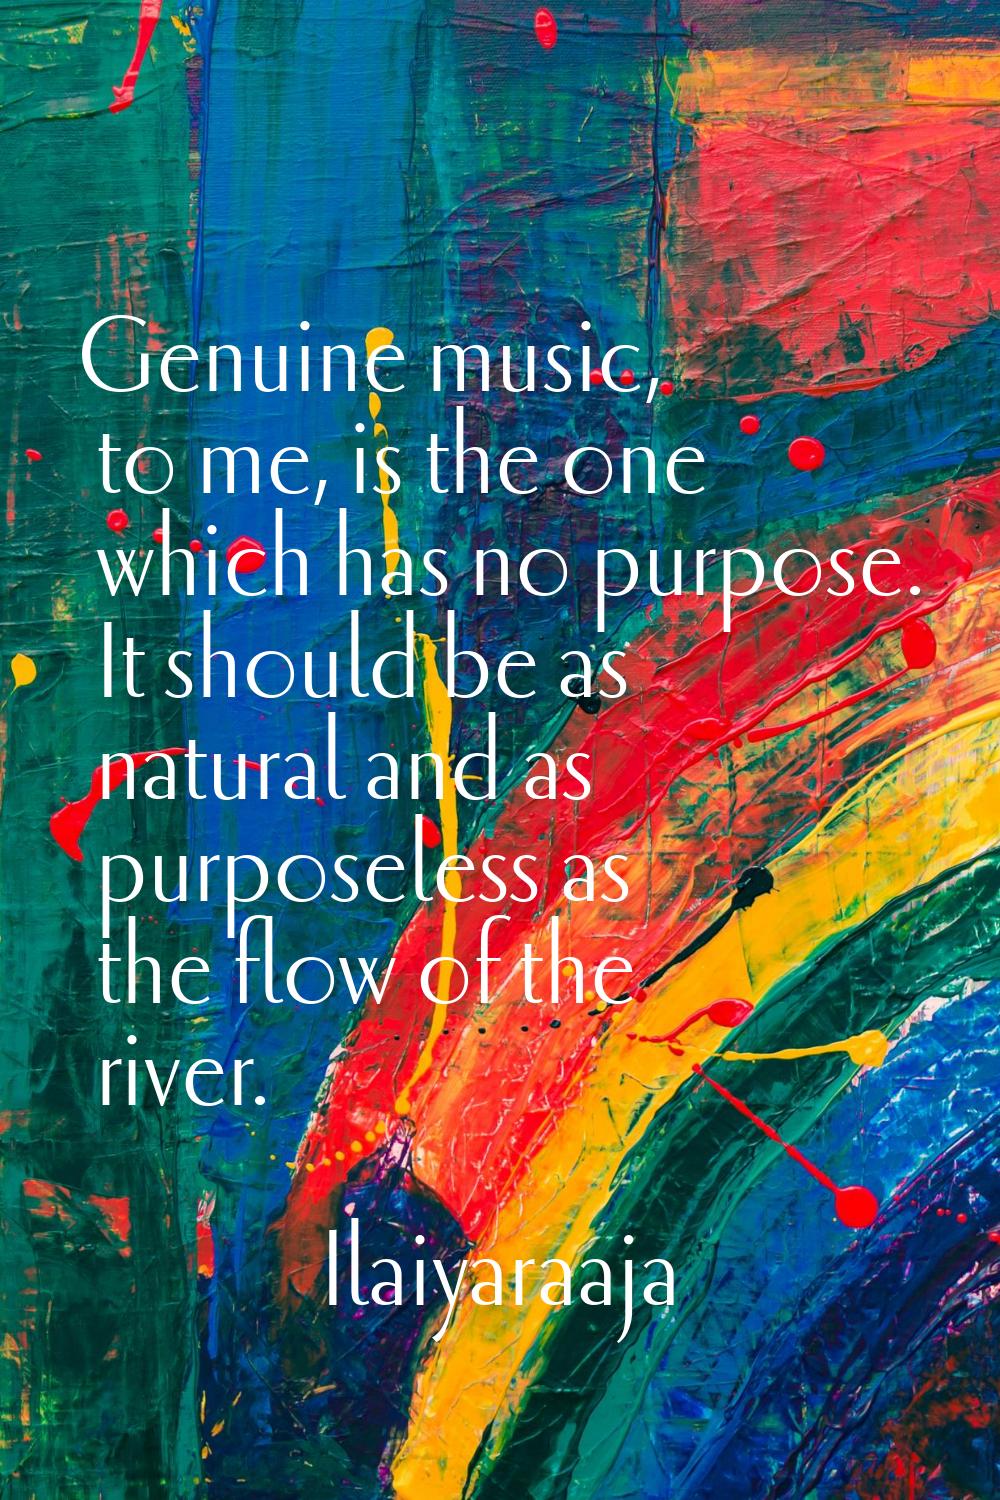 Genuine music, to me, is the one which has no purpose. It should be as natural and as purposeless a